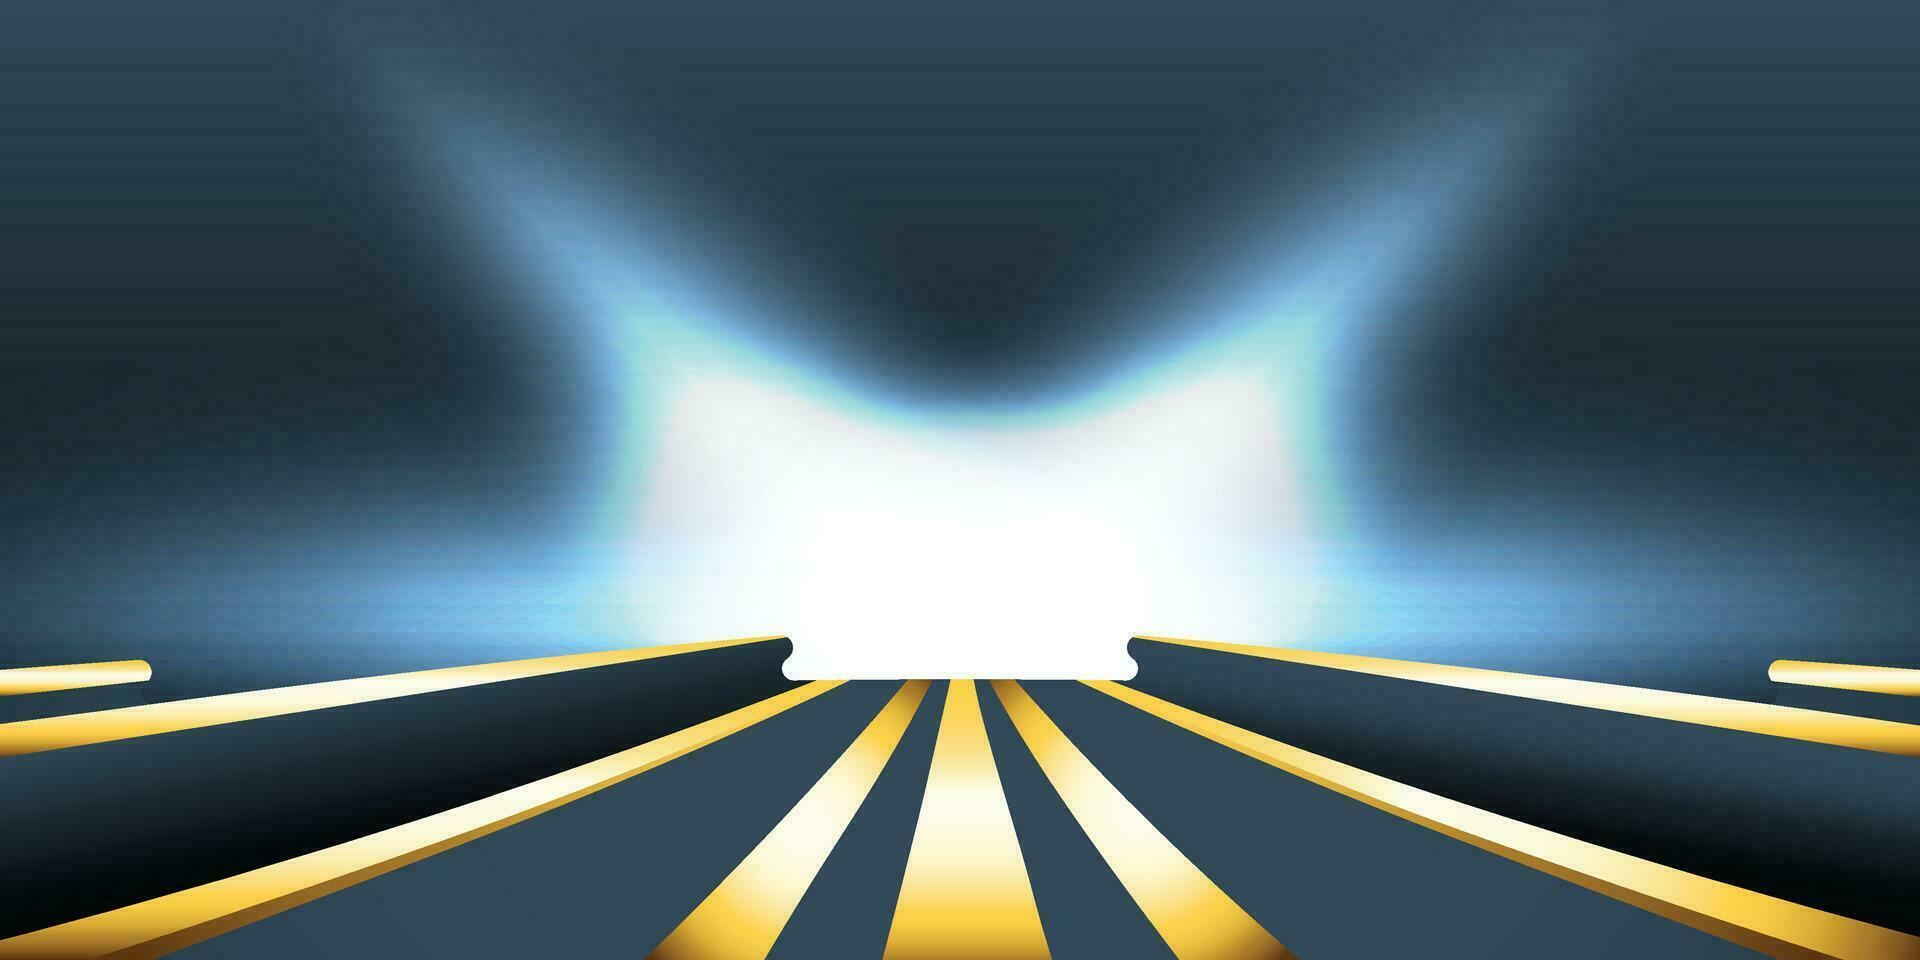 Abstract background with the concept of a path to light, suitable for promotional goods, business covers, banners vector